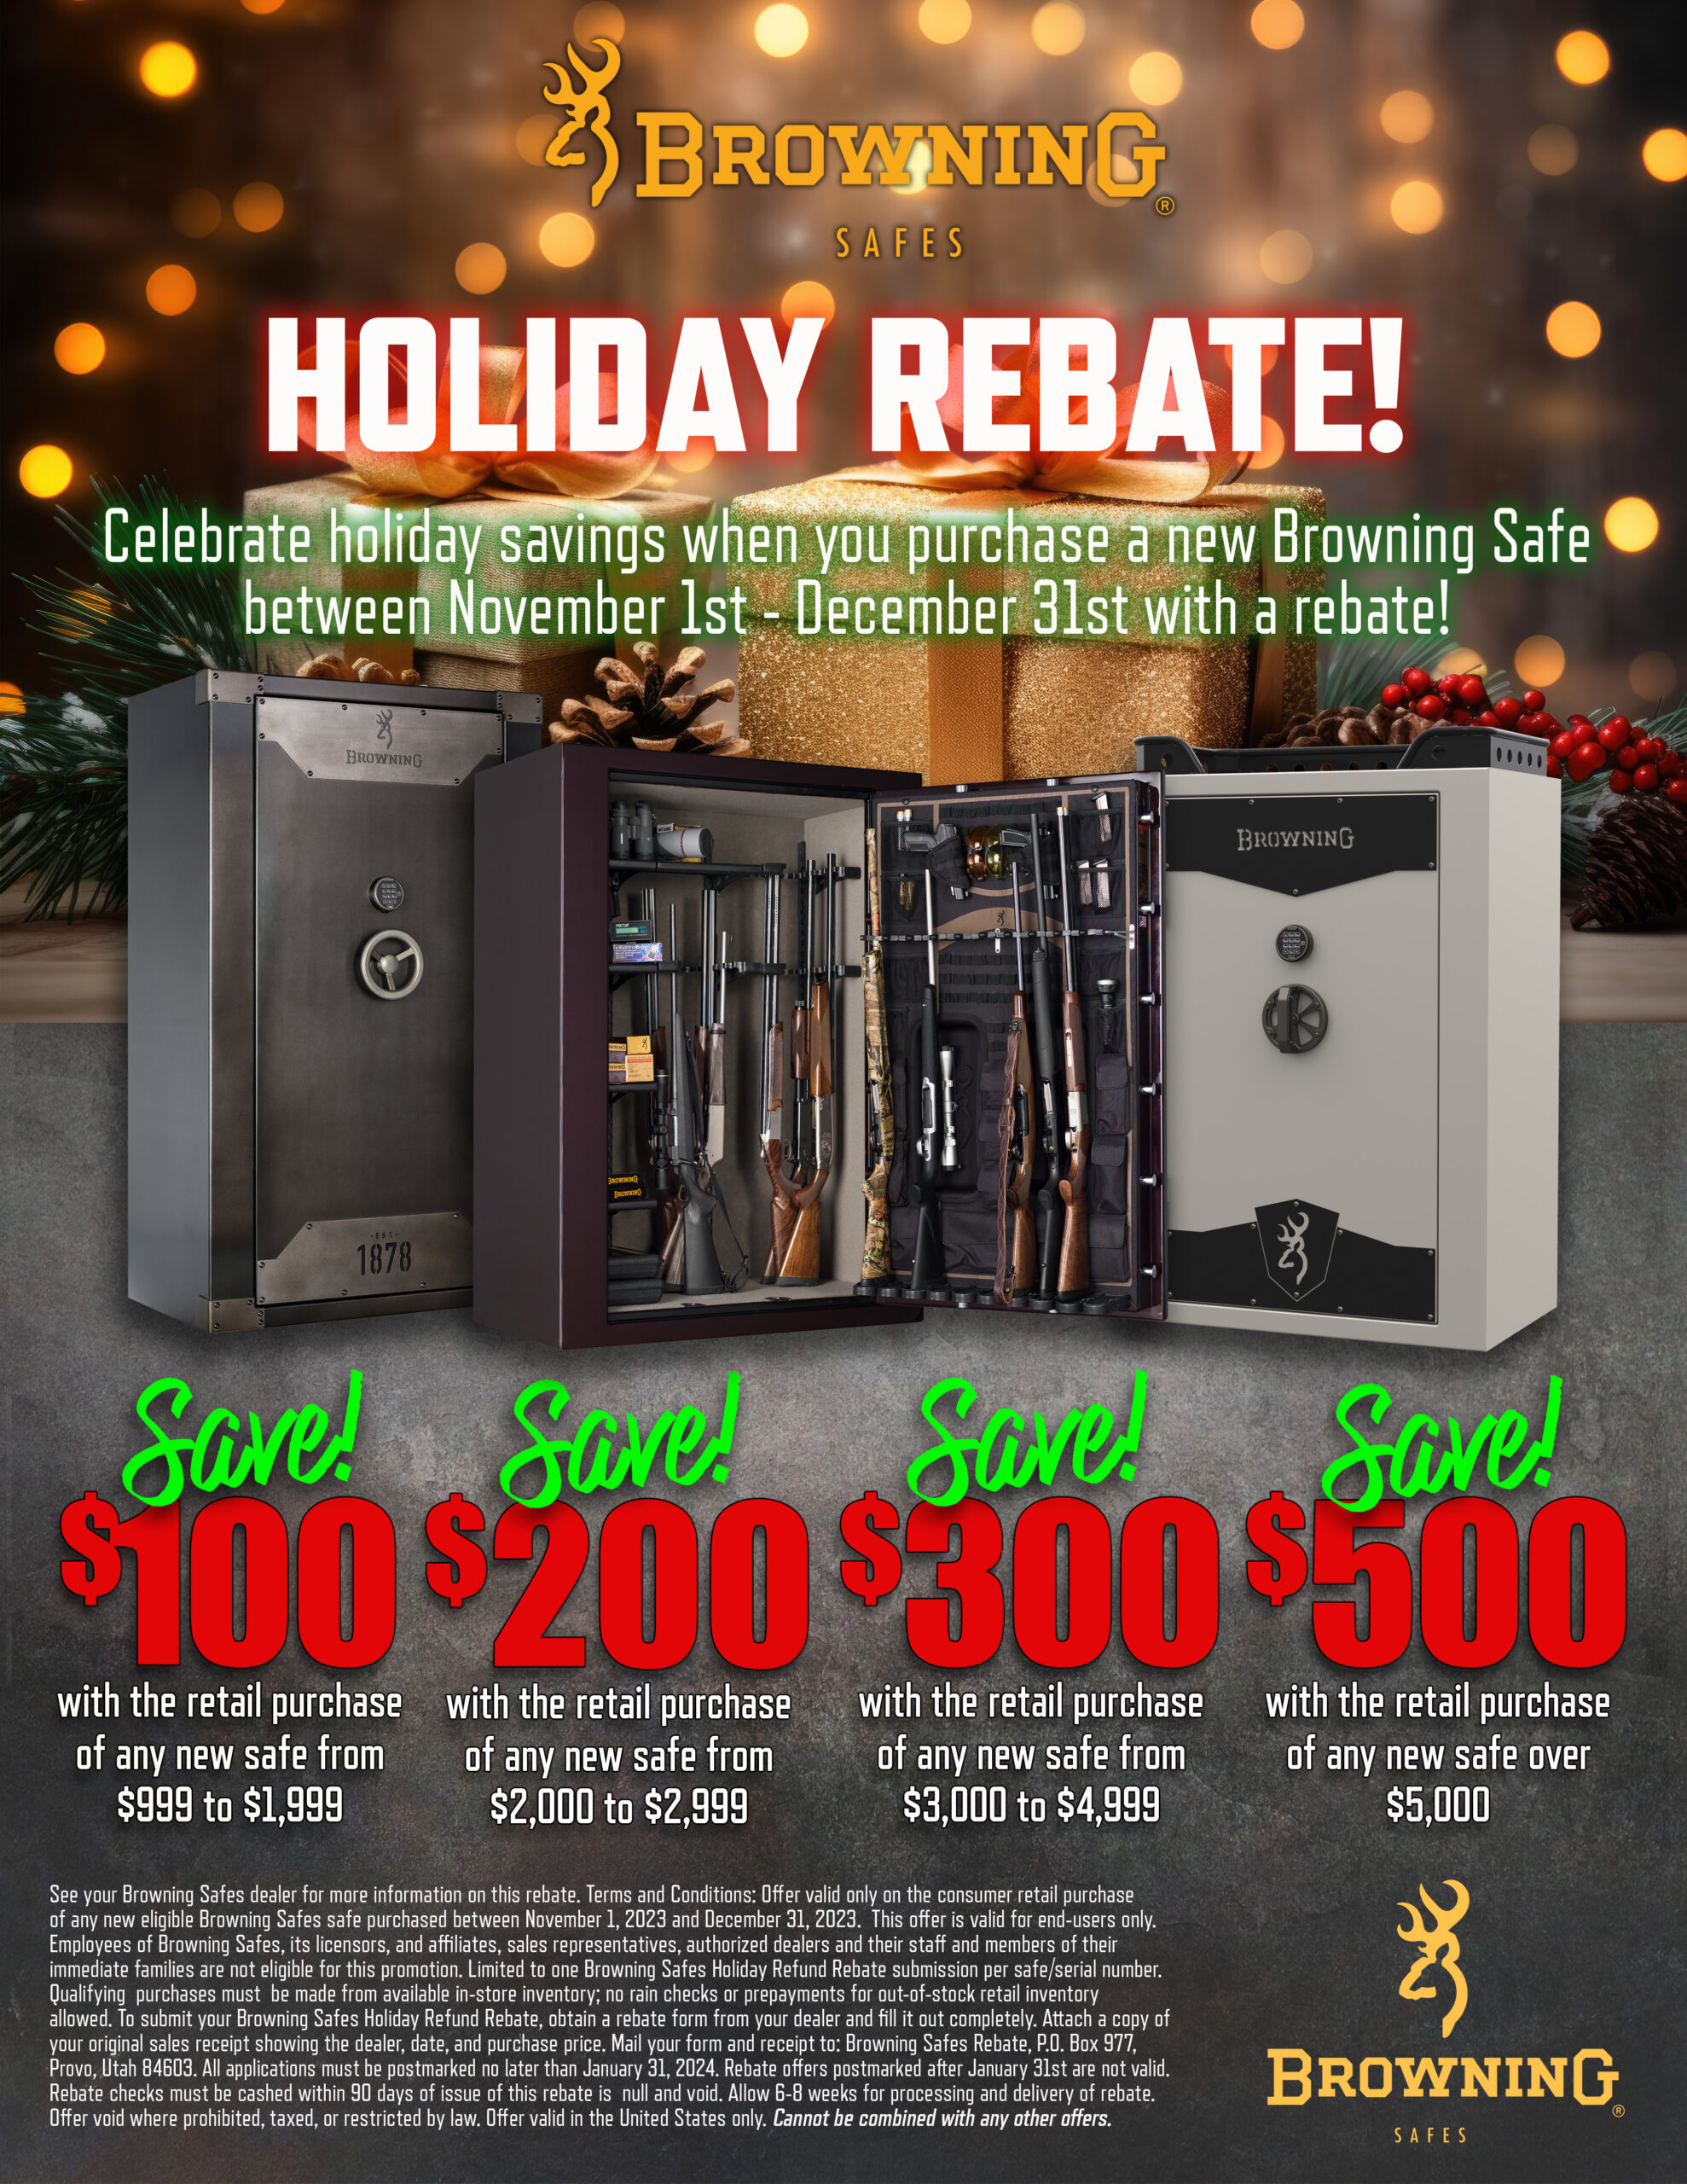 Browning Safe Rebates are Back for the Holidays The Safe House